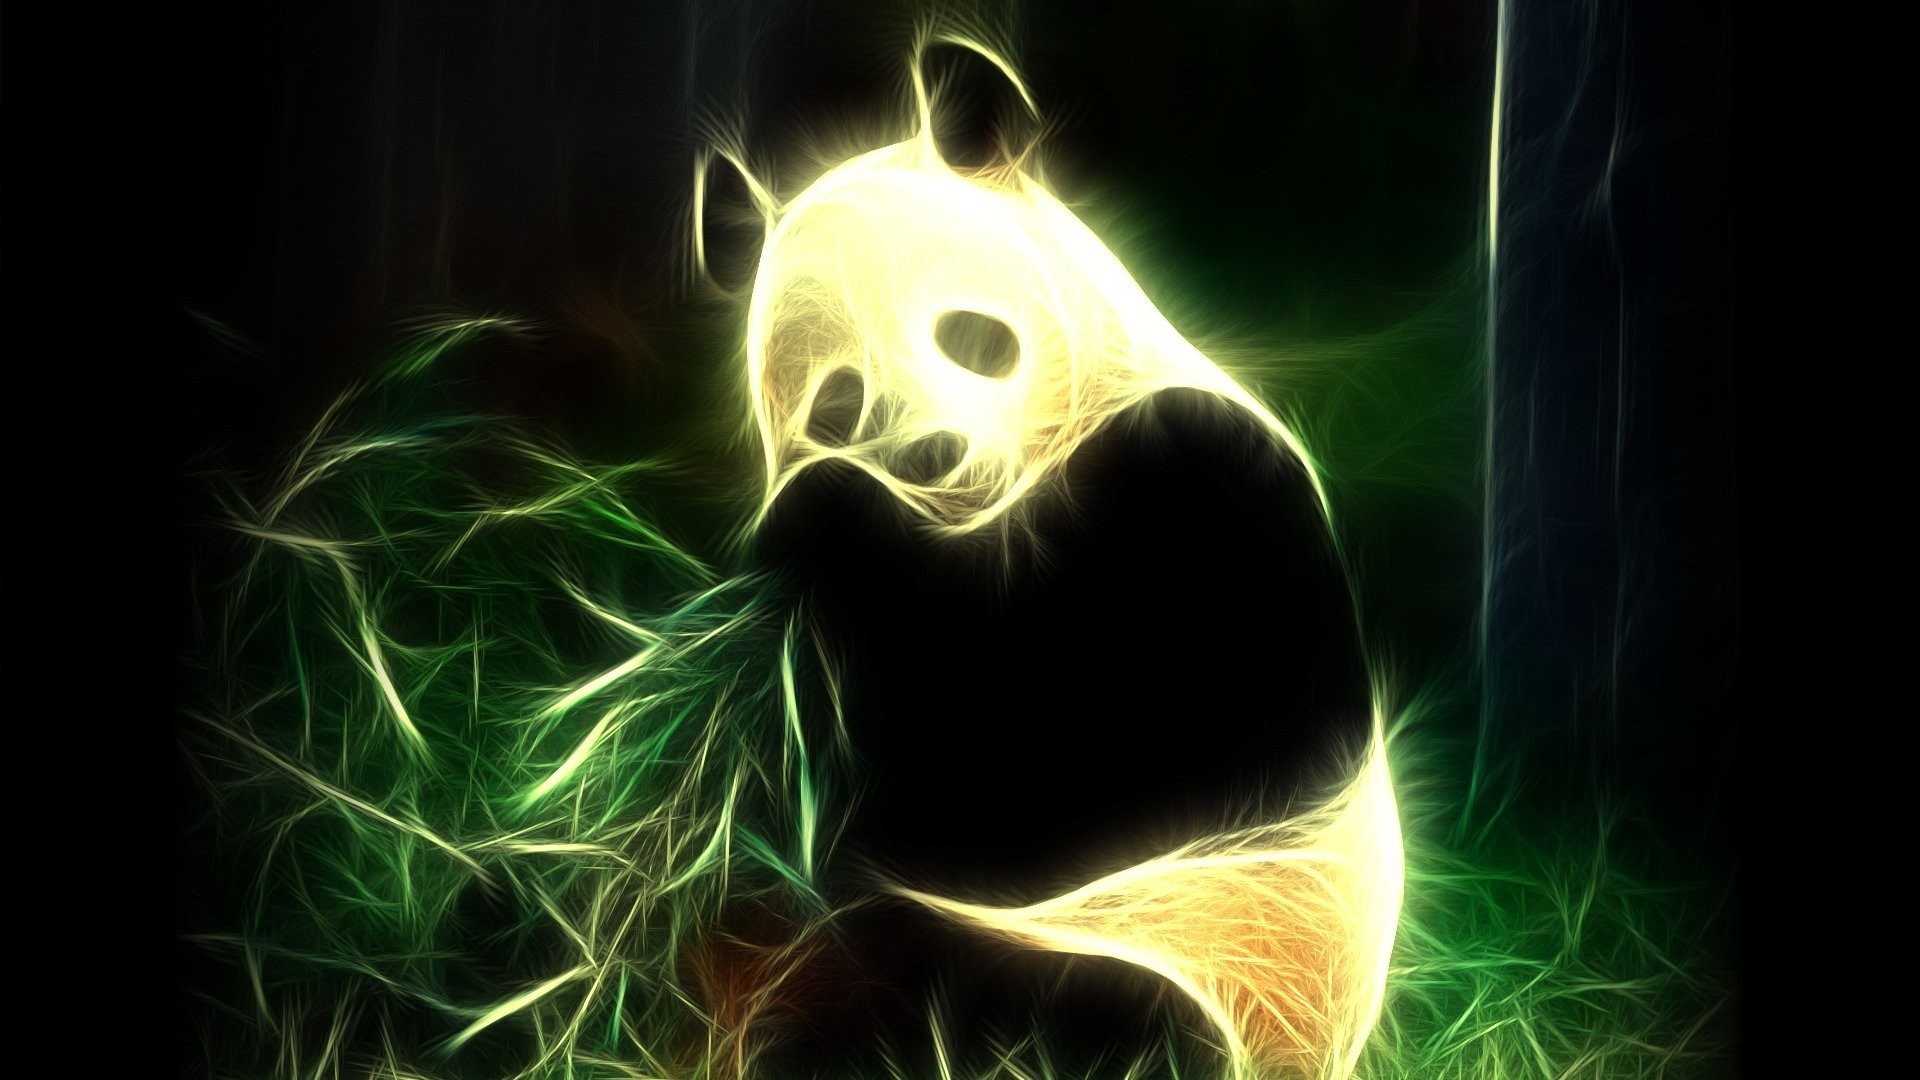 Cute Panda Pictures Wallpaper - 3d Live Wallpaper For Mobile Free Download , HD Wallpaper & Backgrounds